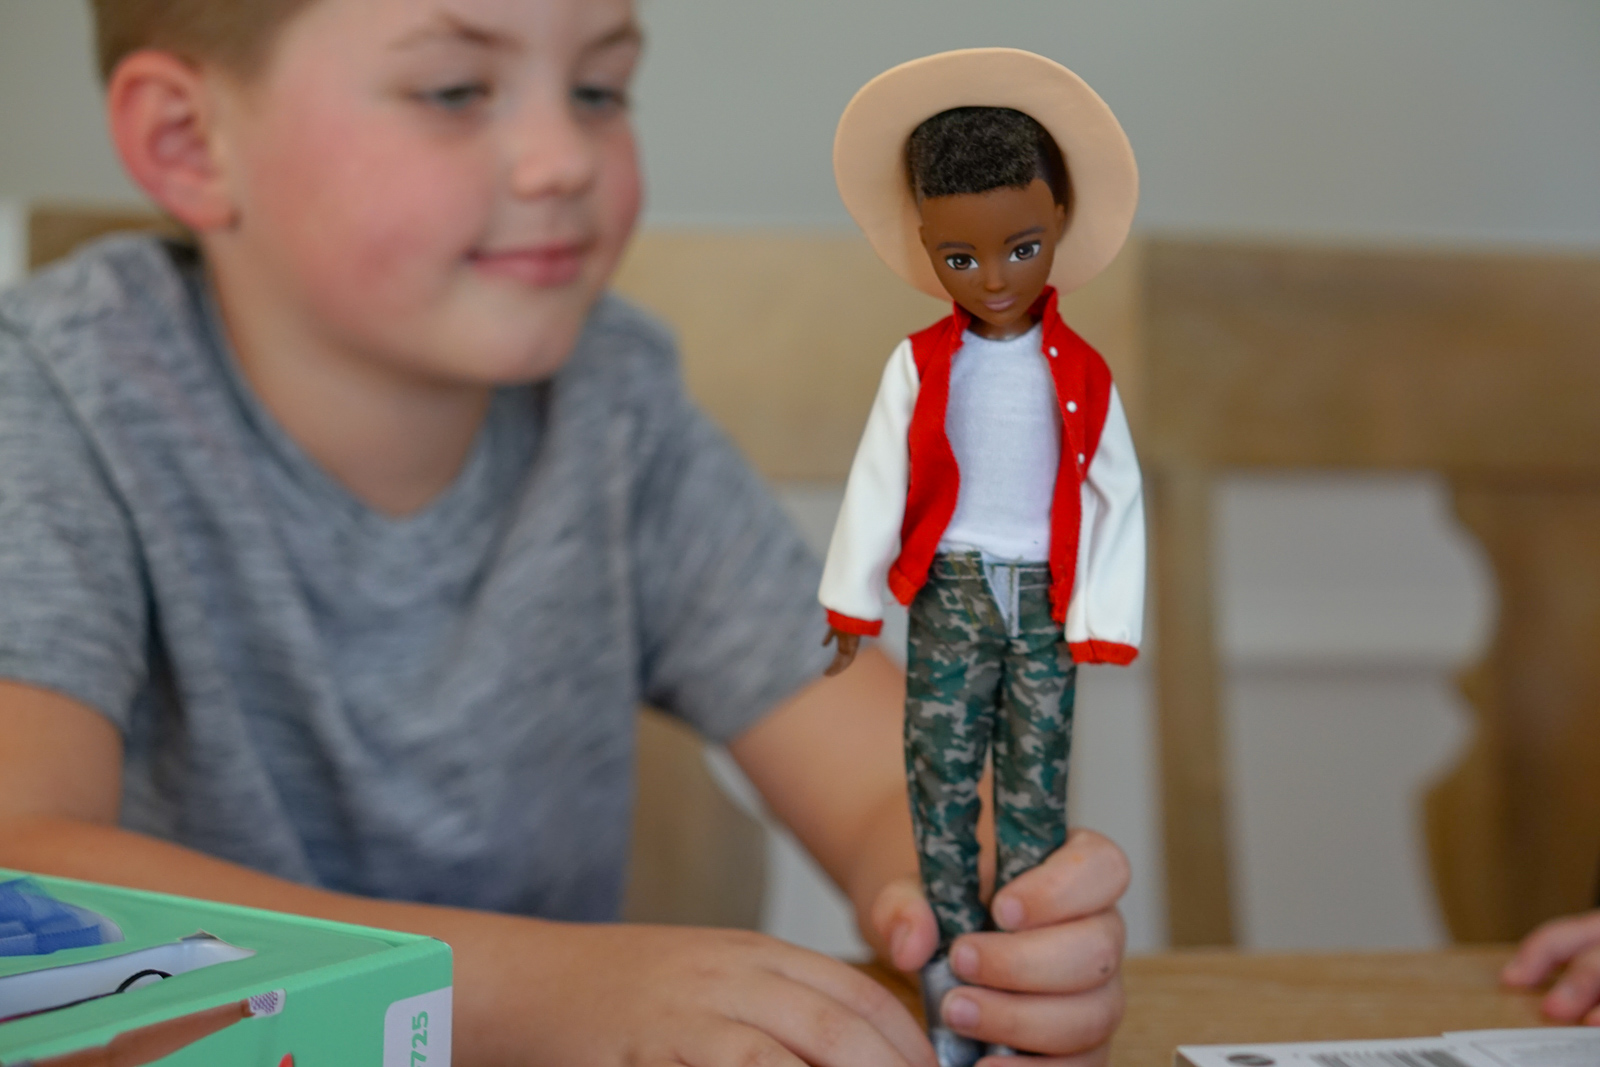 Creatable World Mattel's Gender-Neutral Dolls - Play Without Labels